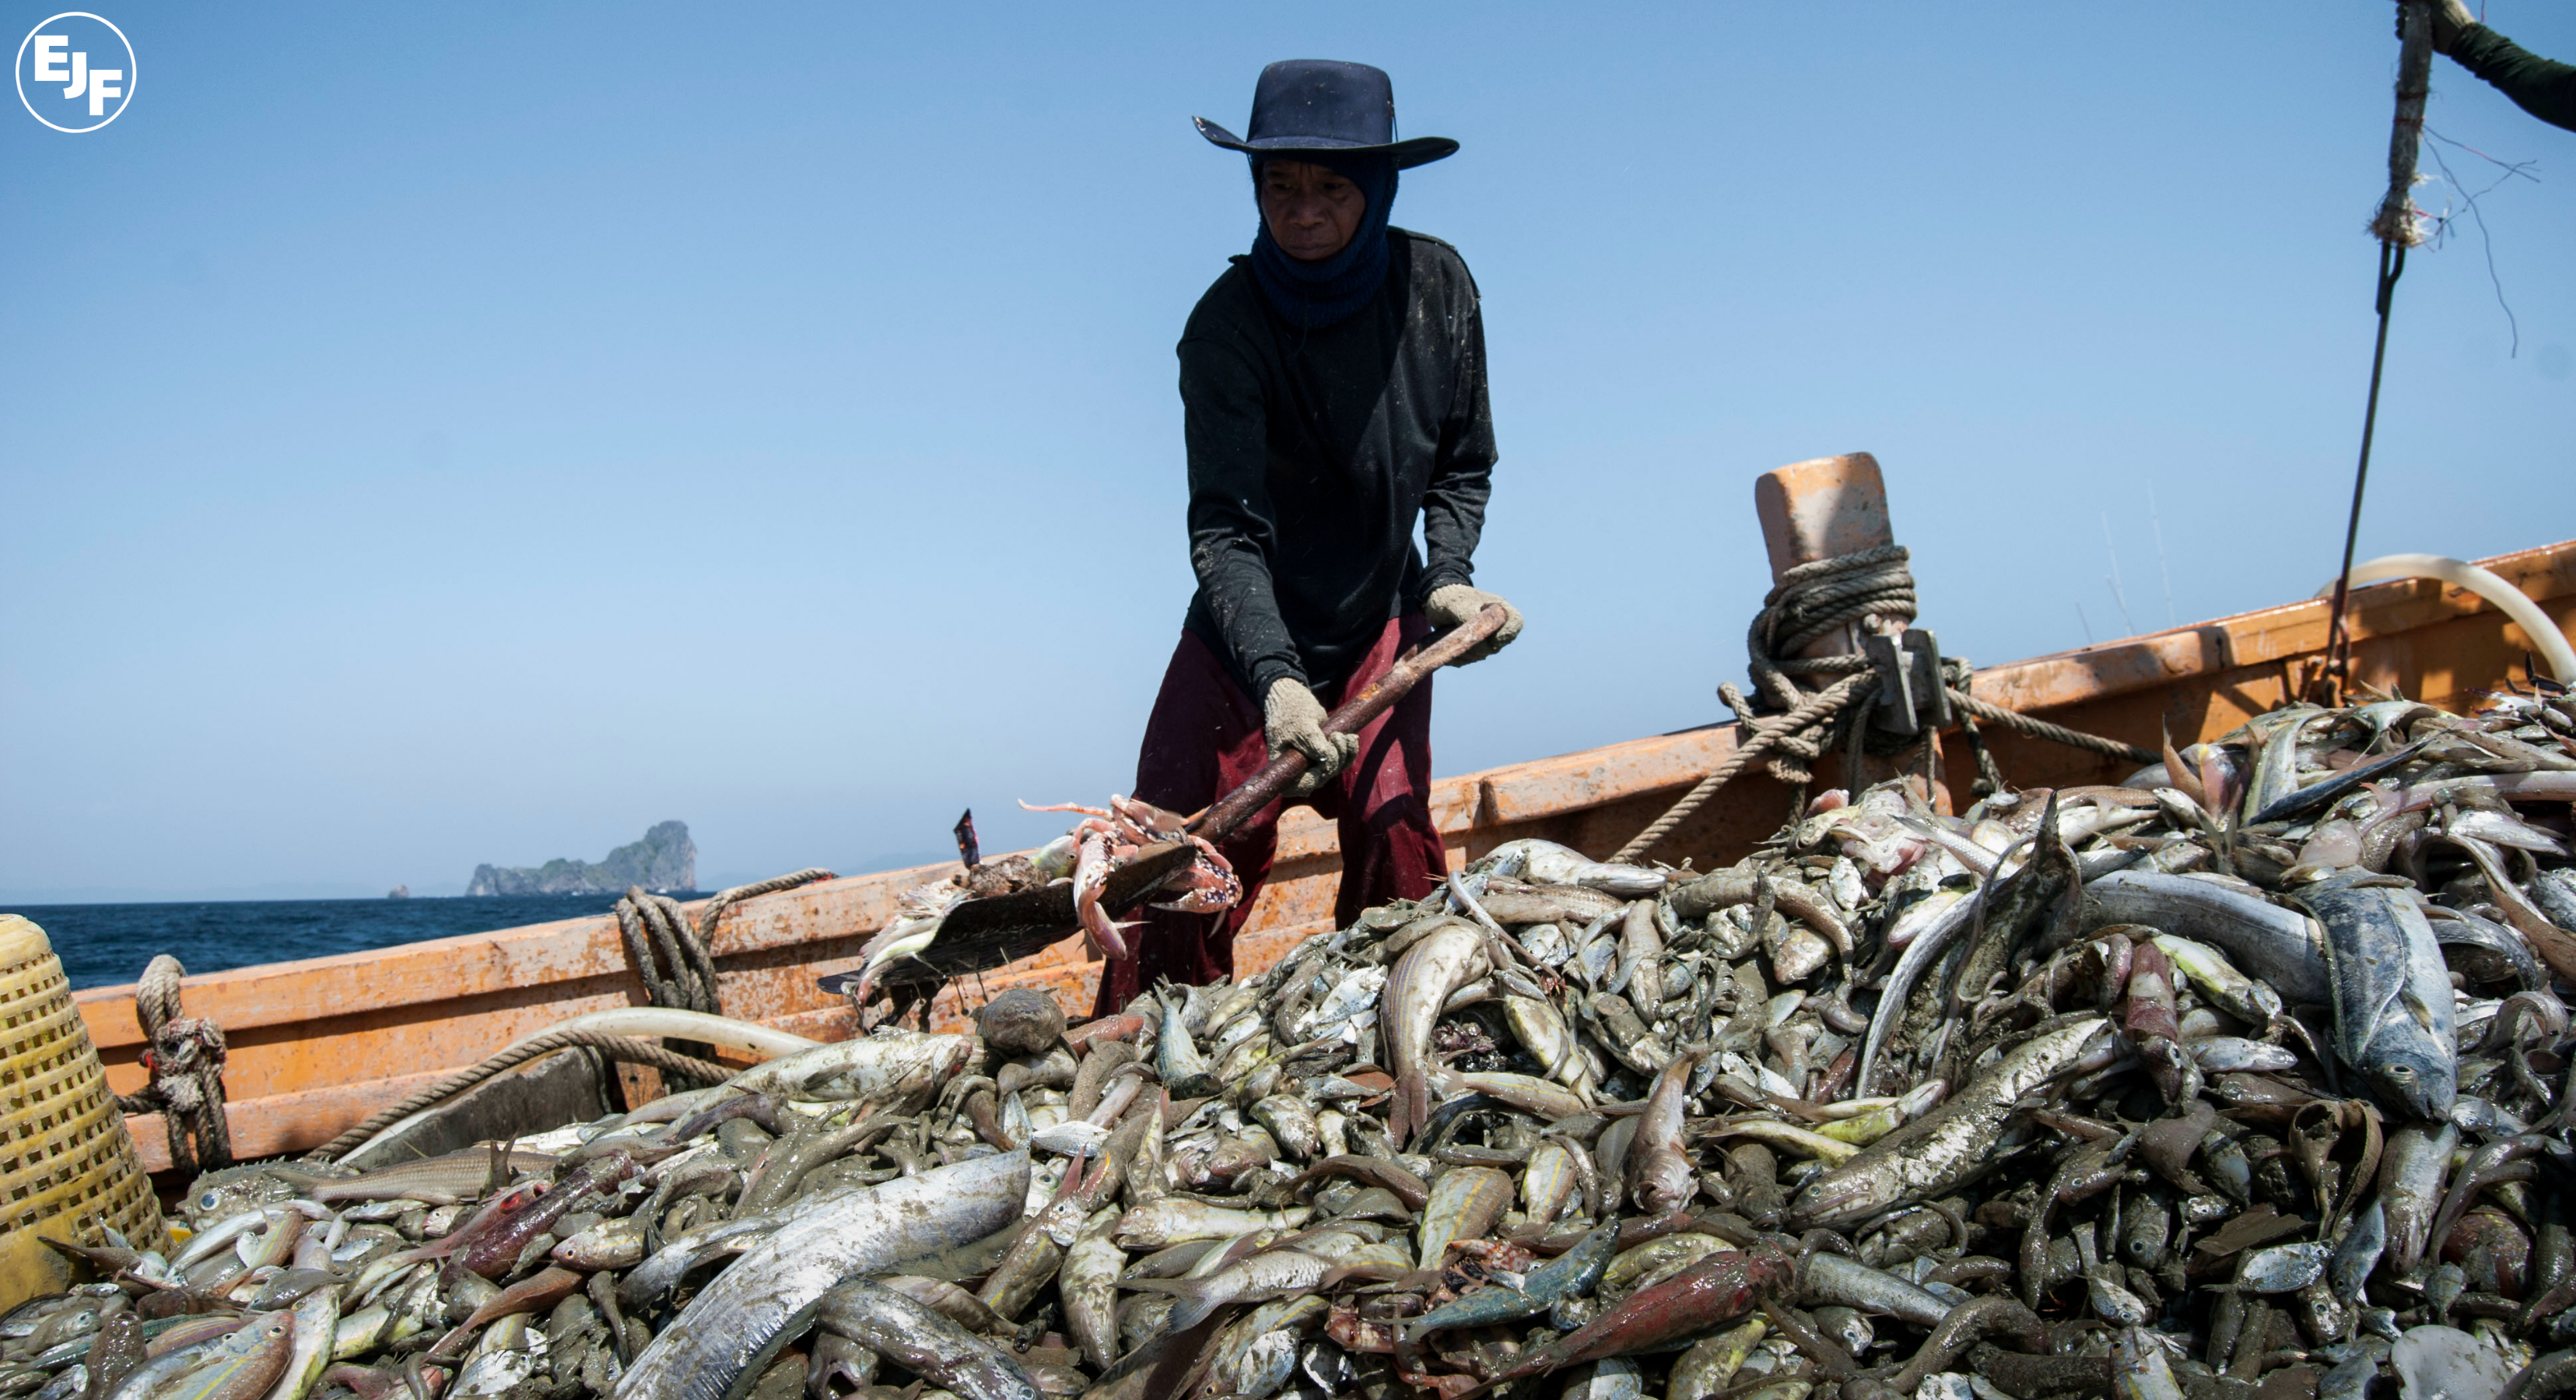 EJF: Thailand’s efforts to eradicate illegal fishing and seafood slavery remain inadequate